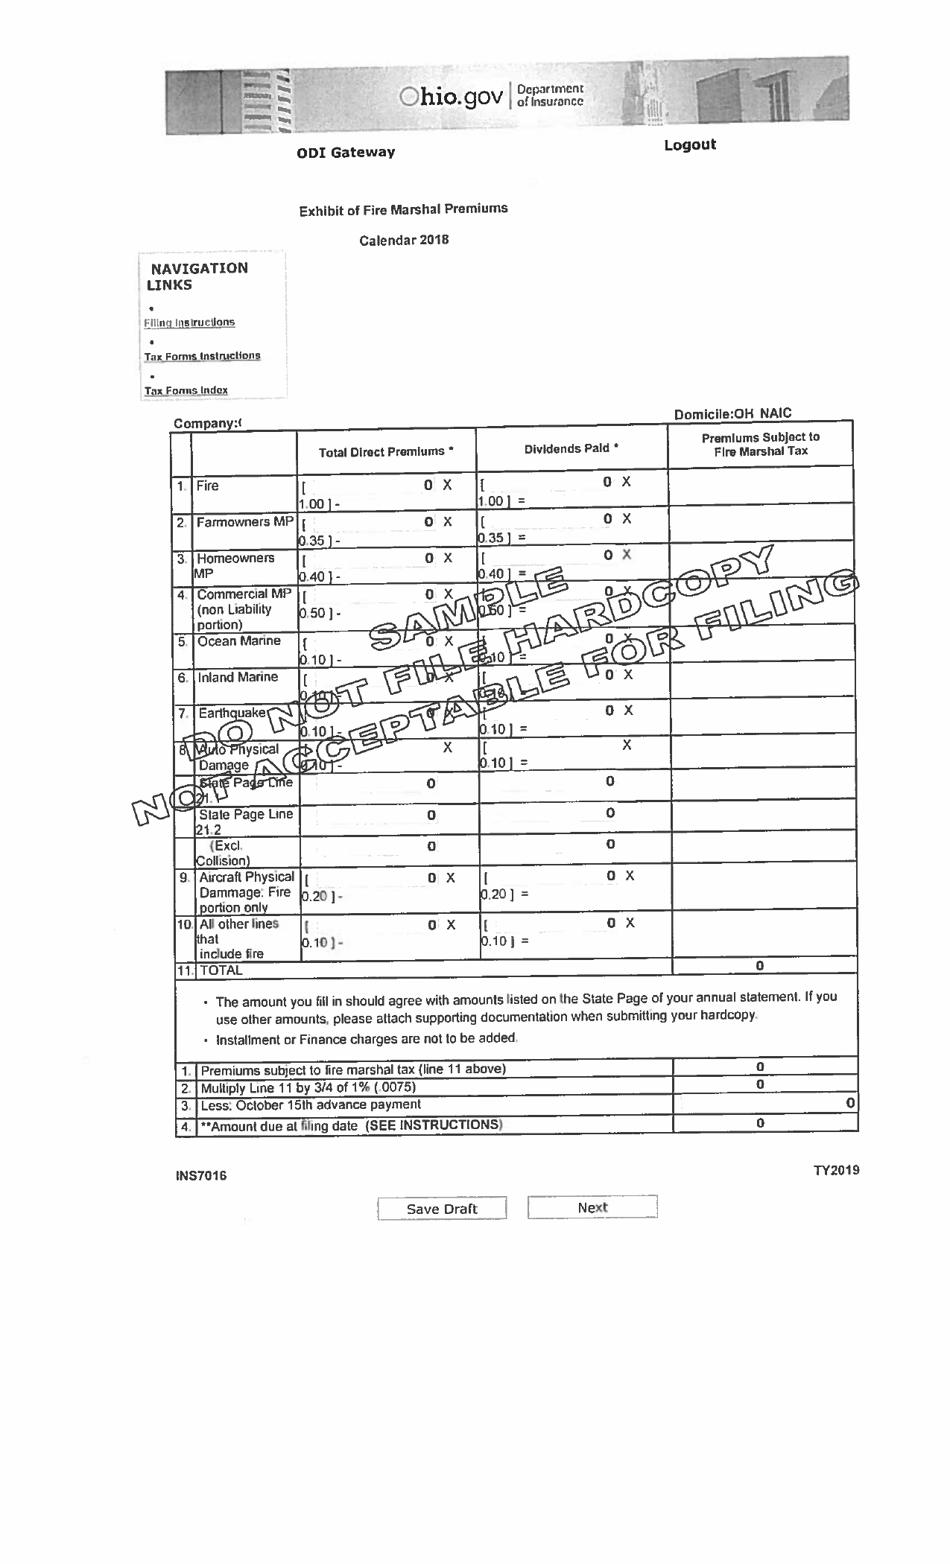 Sample Form INS7016 Exhibit of Fire Marshal Premiums - Ohio, Page 1